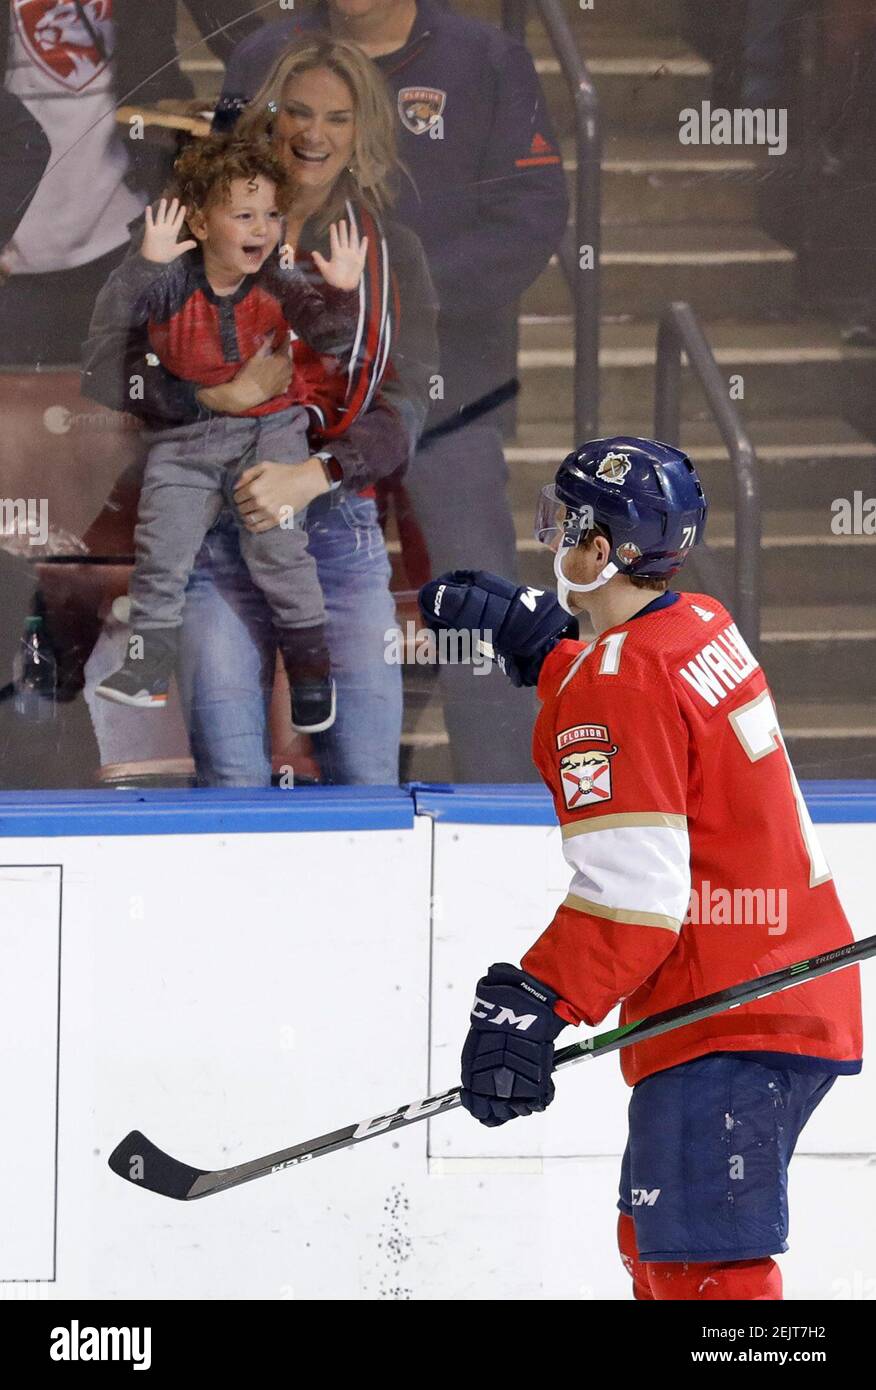 The Florida Panthers' Lucas Wallmark (71) celebrates with fans after scoring against the Montreal Canadiens in the second period at the BB&T Center in Sunrise, Fla., on Saturday, March 7, 2020. The Panthers won, 4-1. (Al Diaz/Miami Herald/TNS) Stock Photo